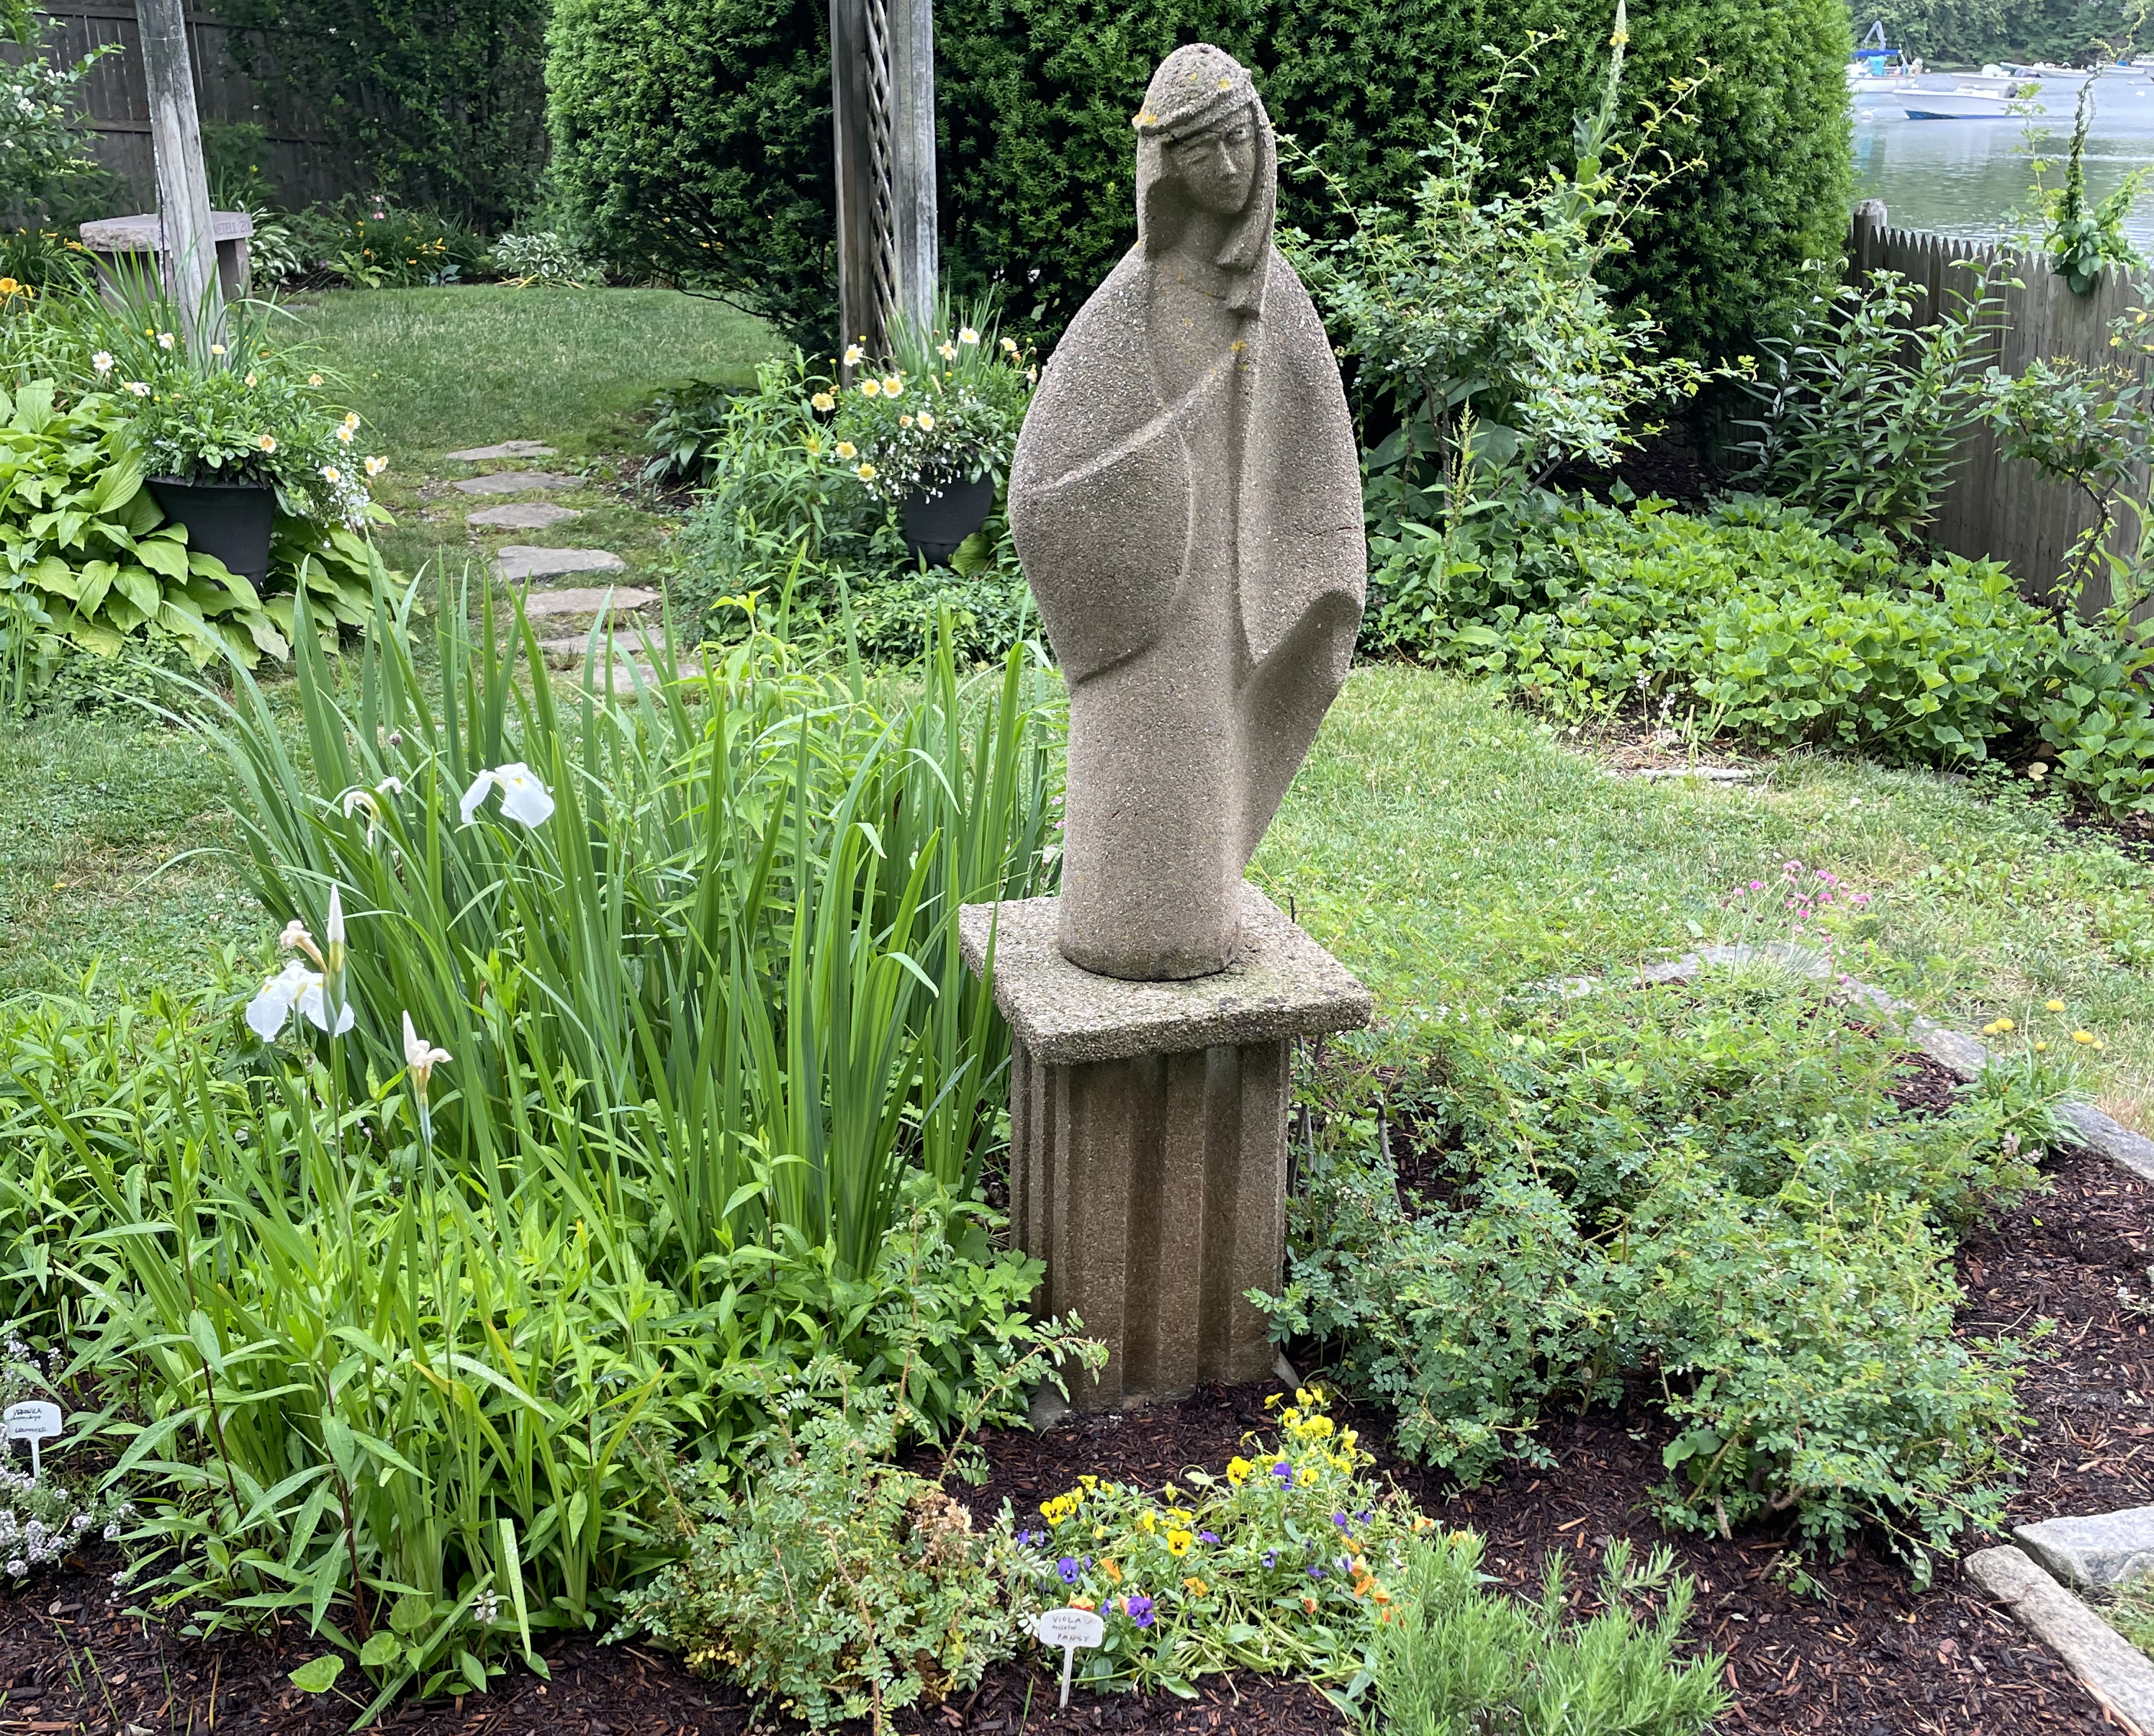 Current day photo of the Virgin Mary statue surrounded by flowers and plants